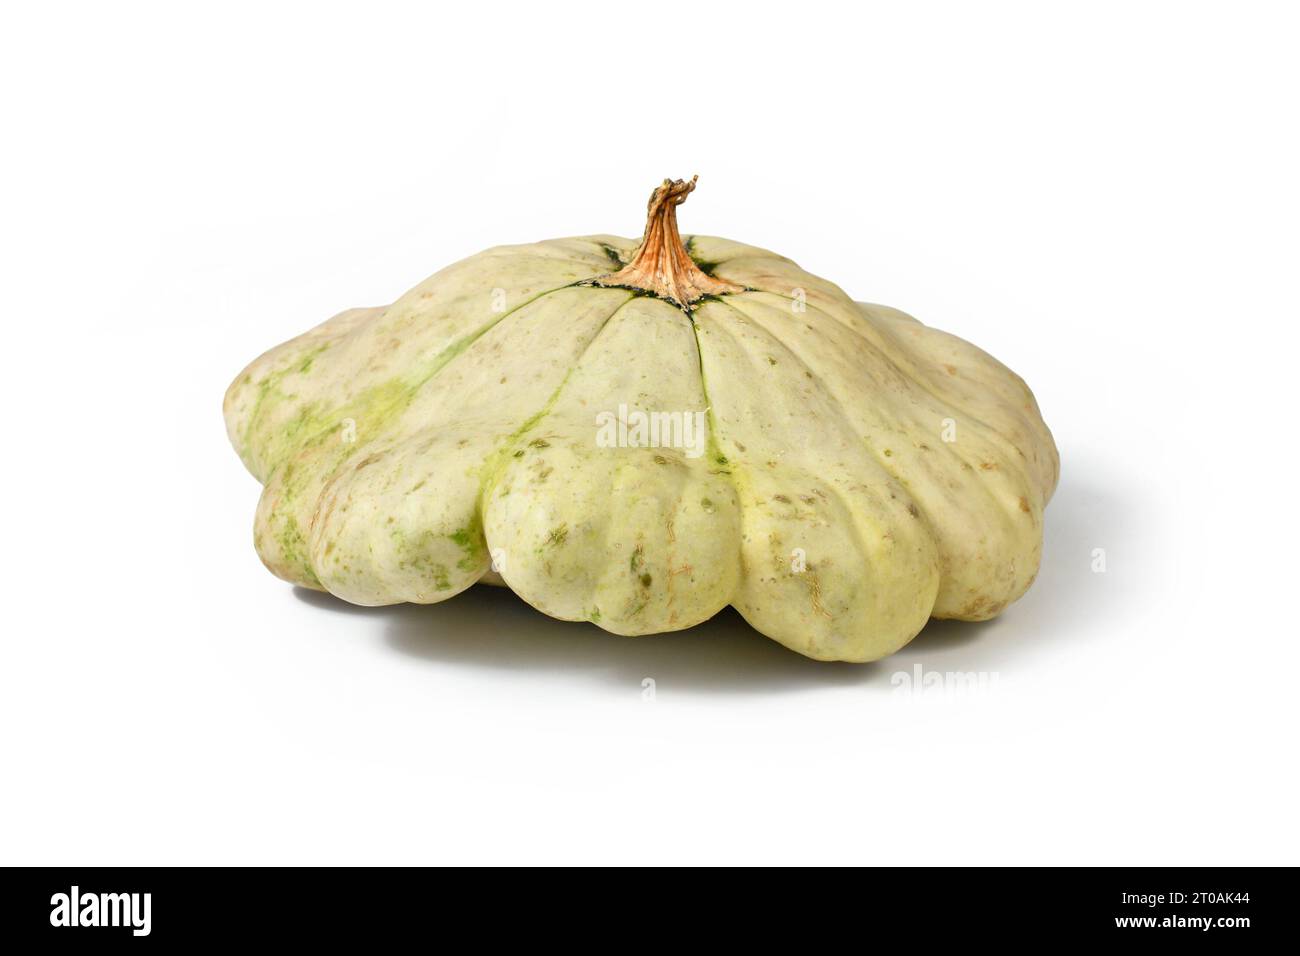 Light yellow Pattypan squash with round and shallow shape and scalloped edges on white background Stock Photo